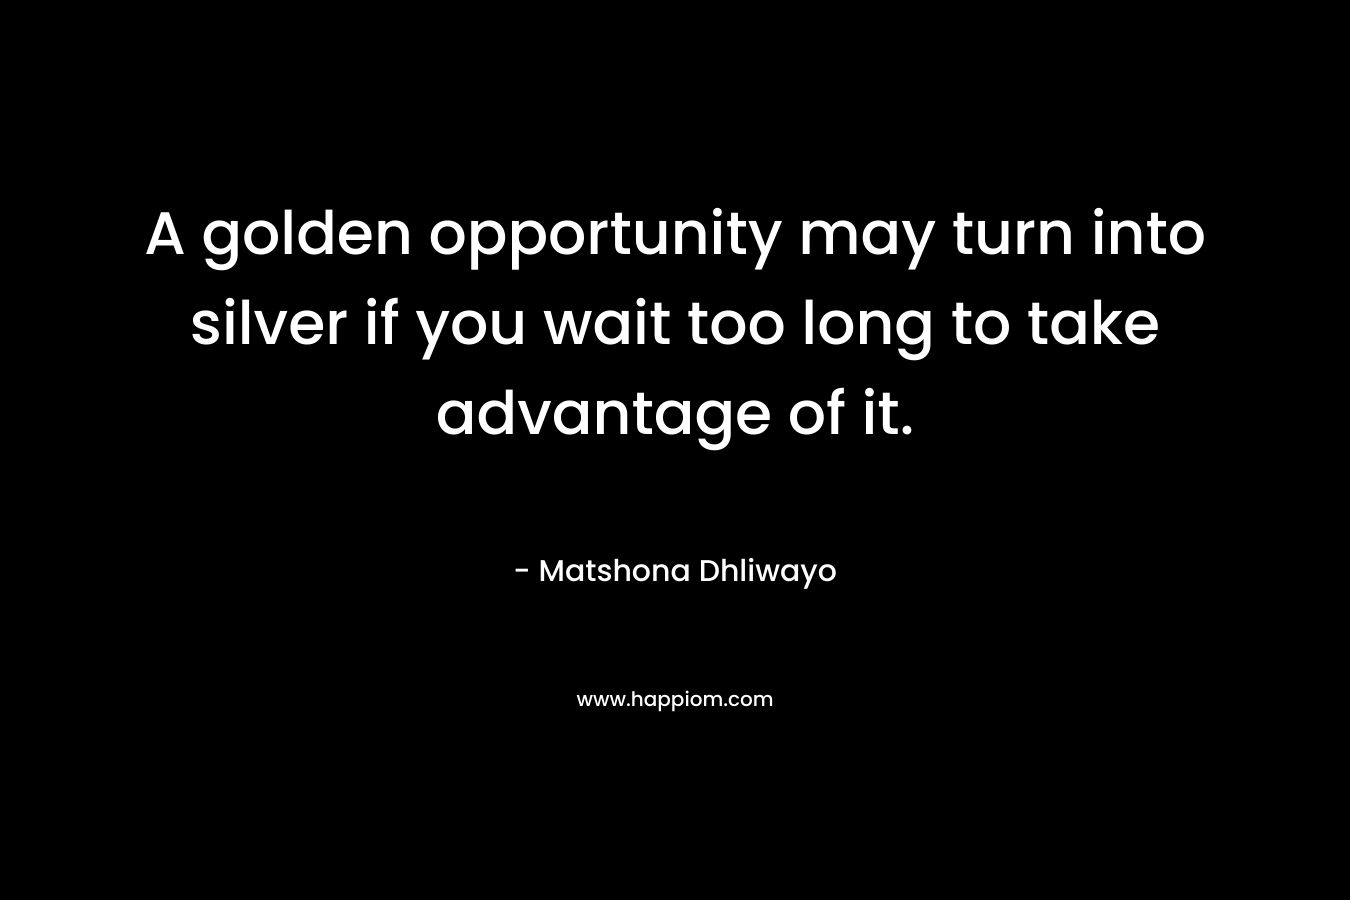 A golden opportunity may turn into silver if you wait too long to take advantage of it.